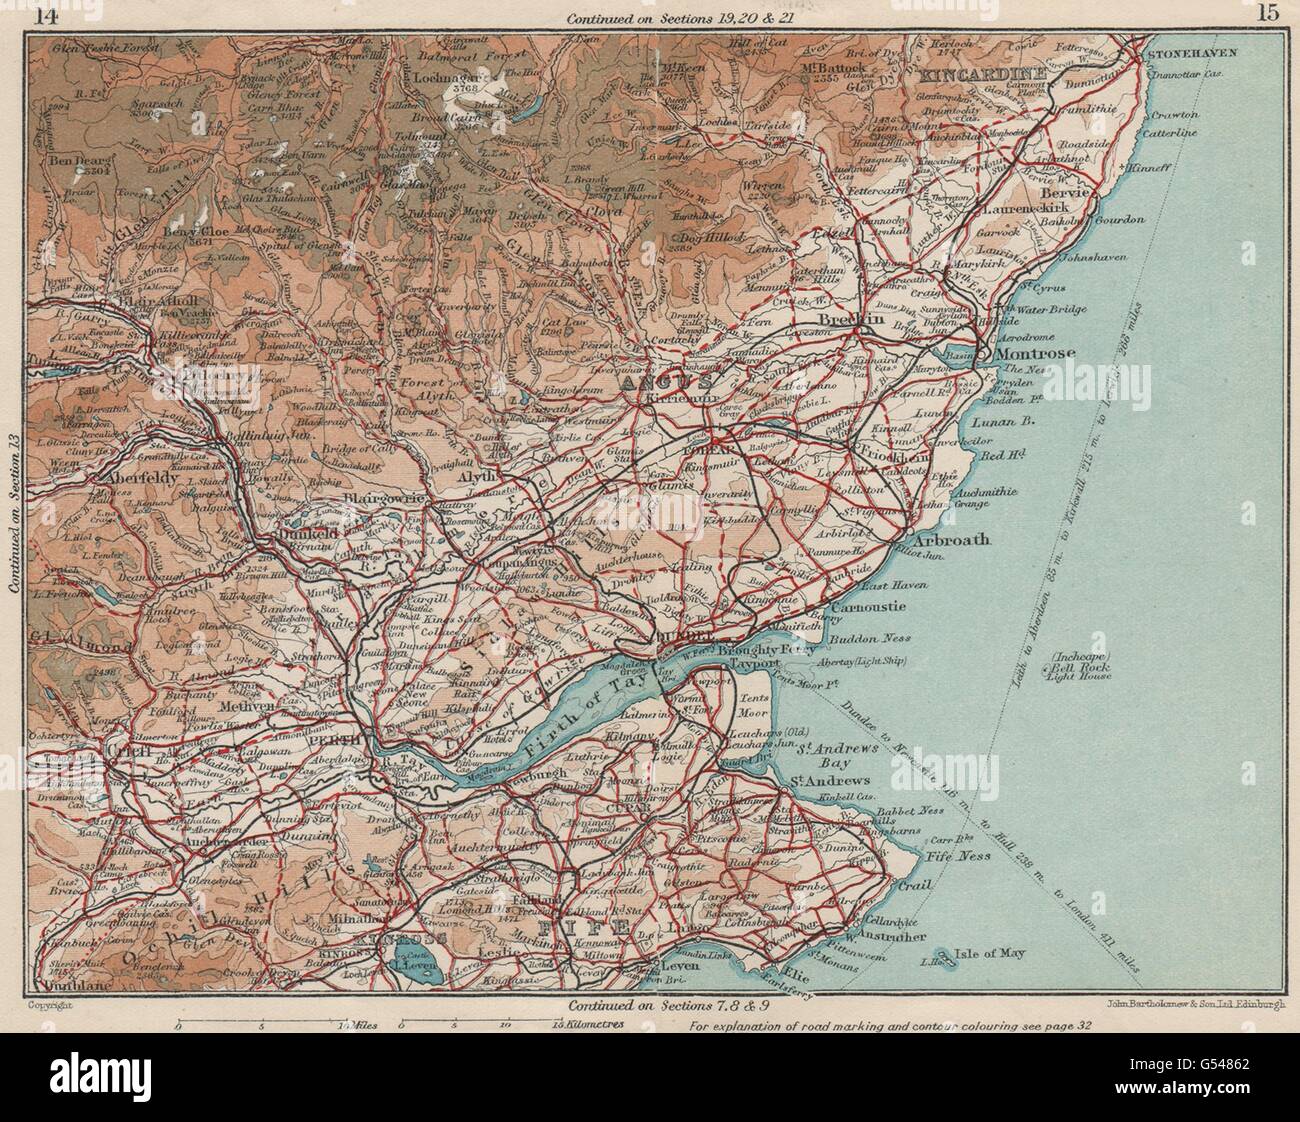 SCOTLAND EAST. Tayside & Fife. Firth of Tay. Vintage map plan, 1932 Stock Photo